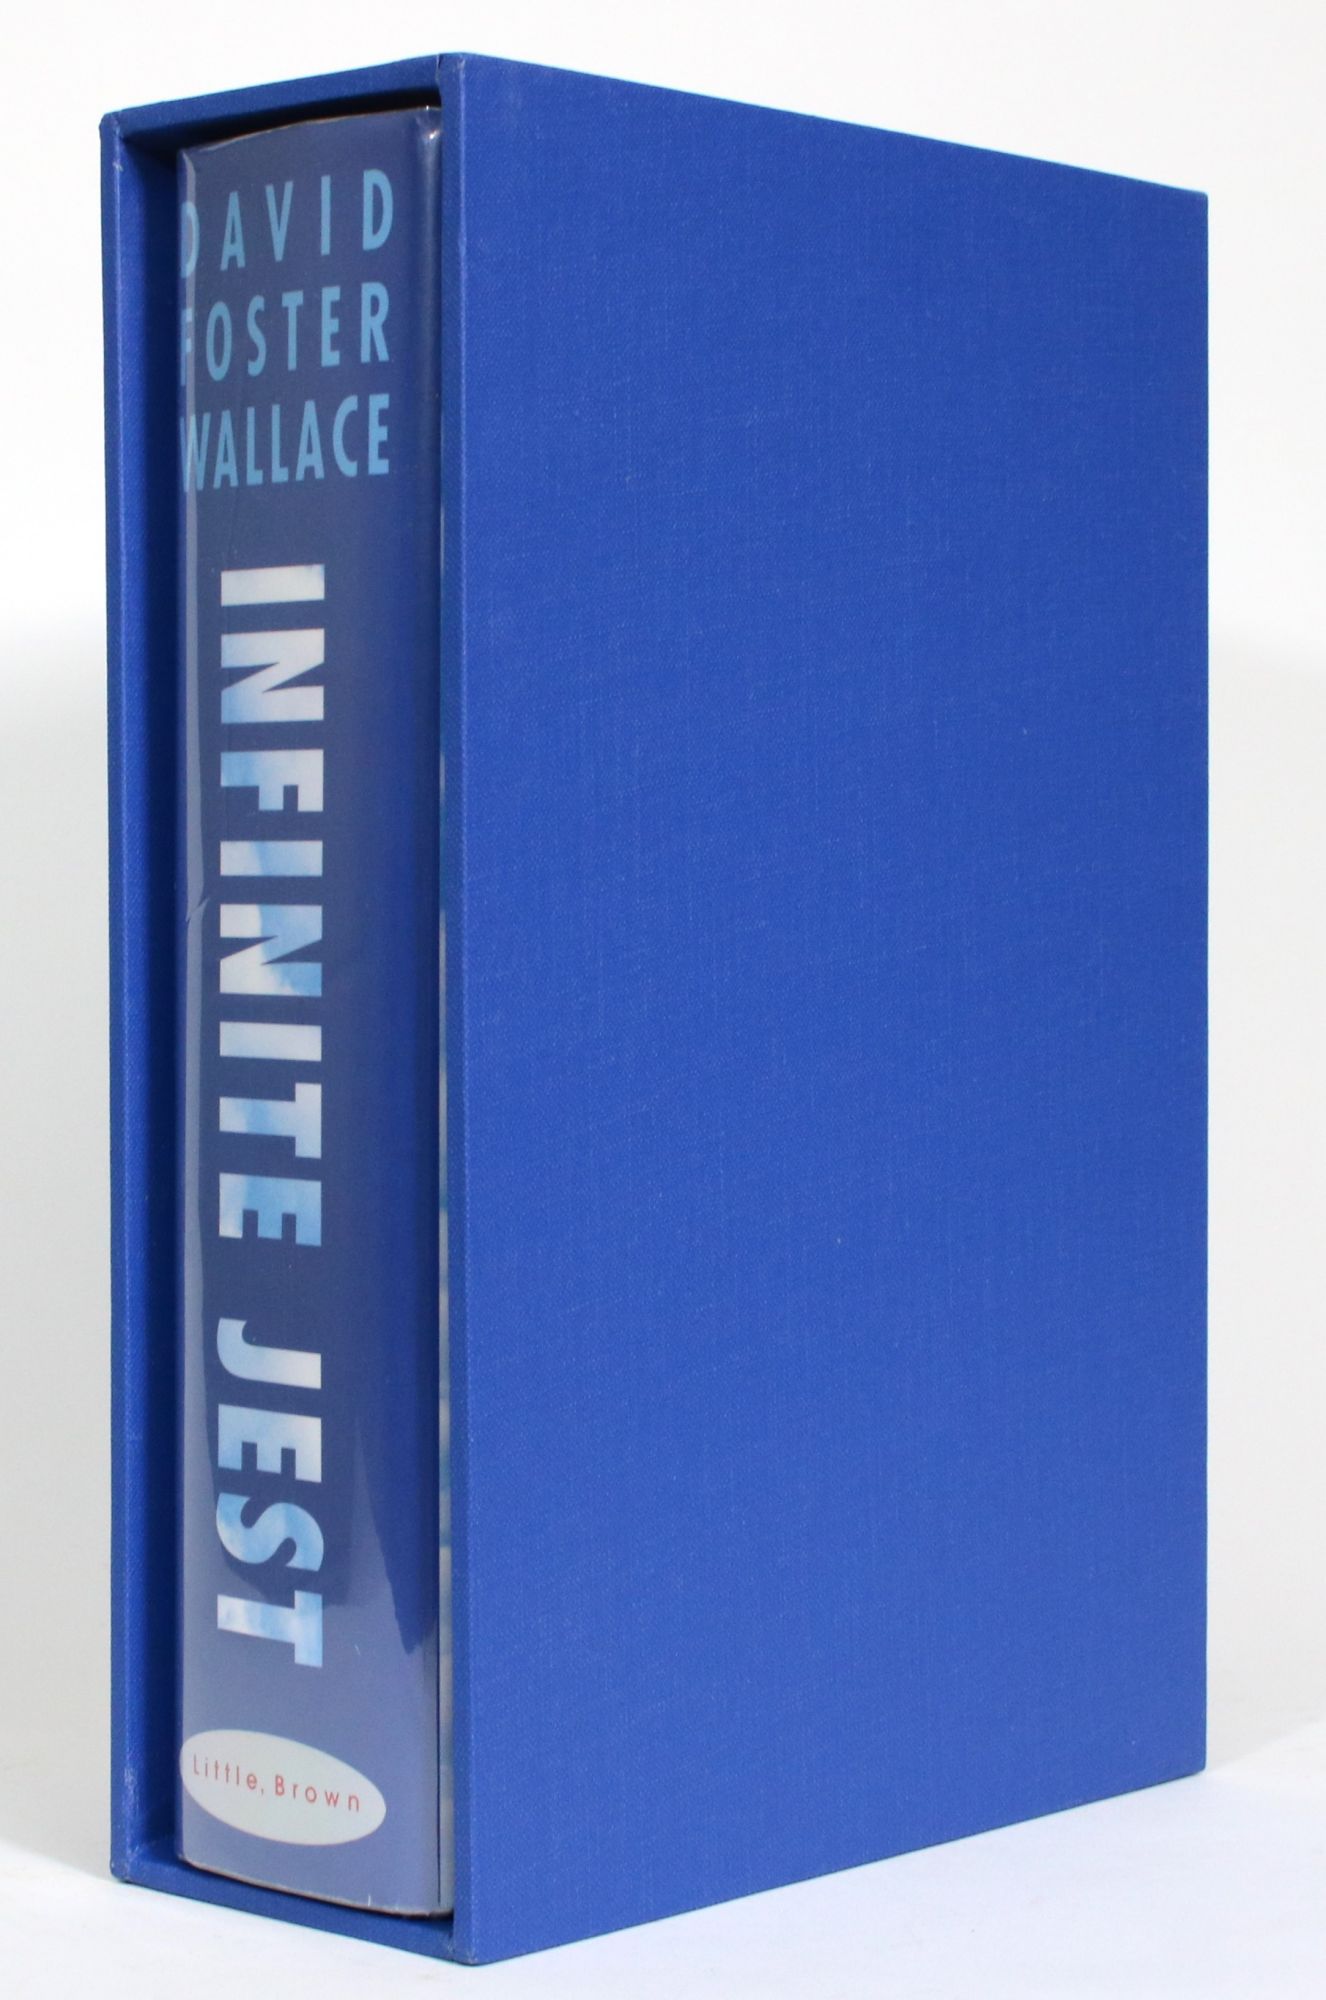 Infinite Jest by David Foster Wallace English Literature American Fiction  First 1996 Hardcover Edition in Dust Jacket 